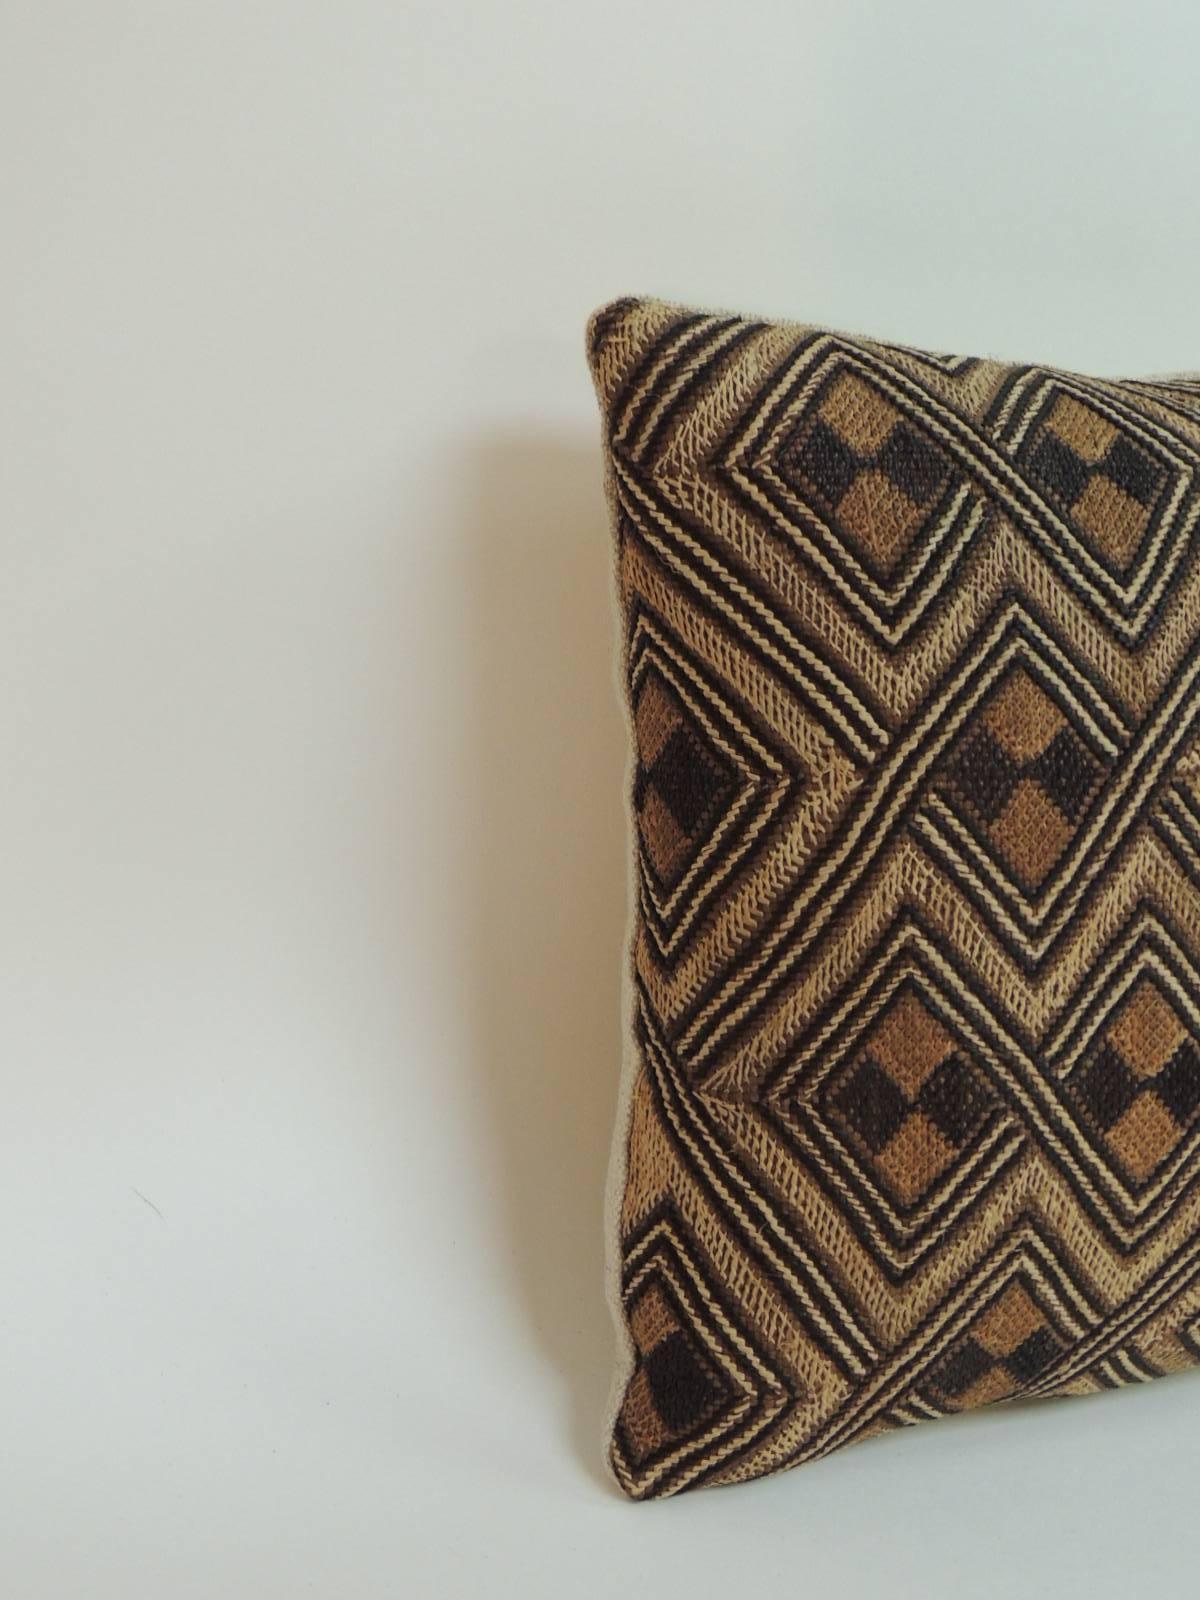 Offered by the Antique Textiles Galleries:
Tribal woven and embroidery African artisanal textile lumbar pillow. Tribal graphic diamond pattern straw cloth/raffia woven textile in shades of brown, camel and tan with homespun textured linen.